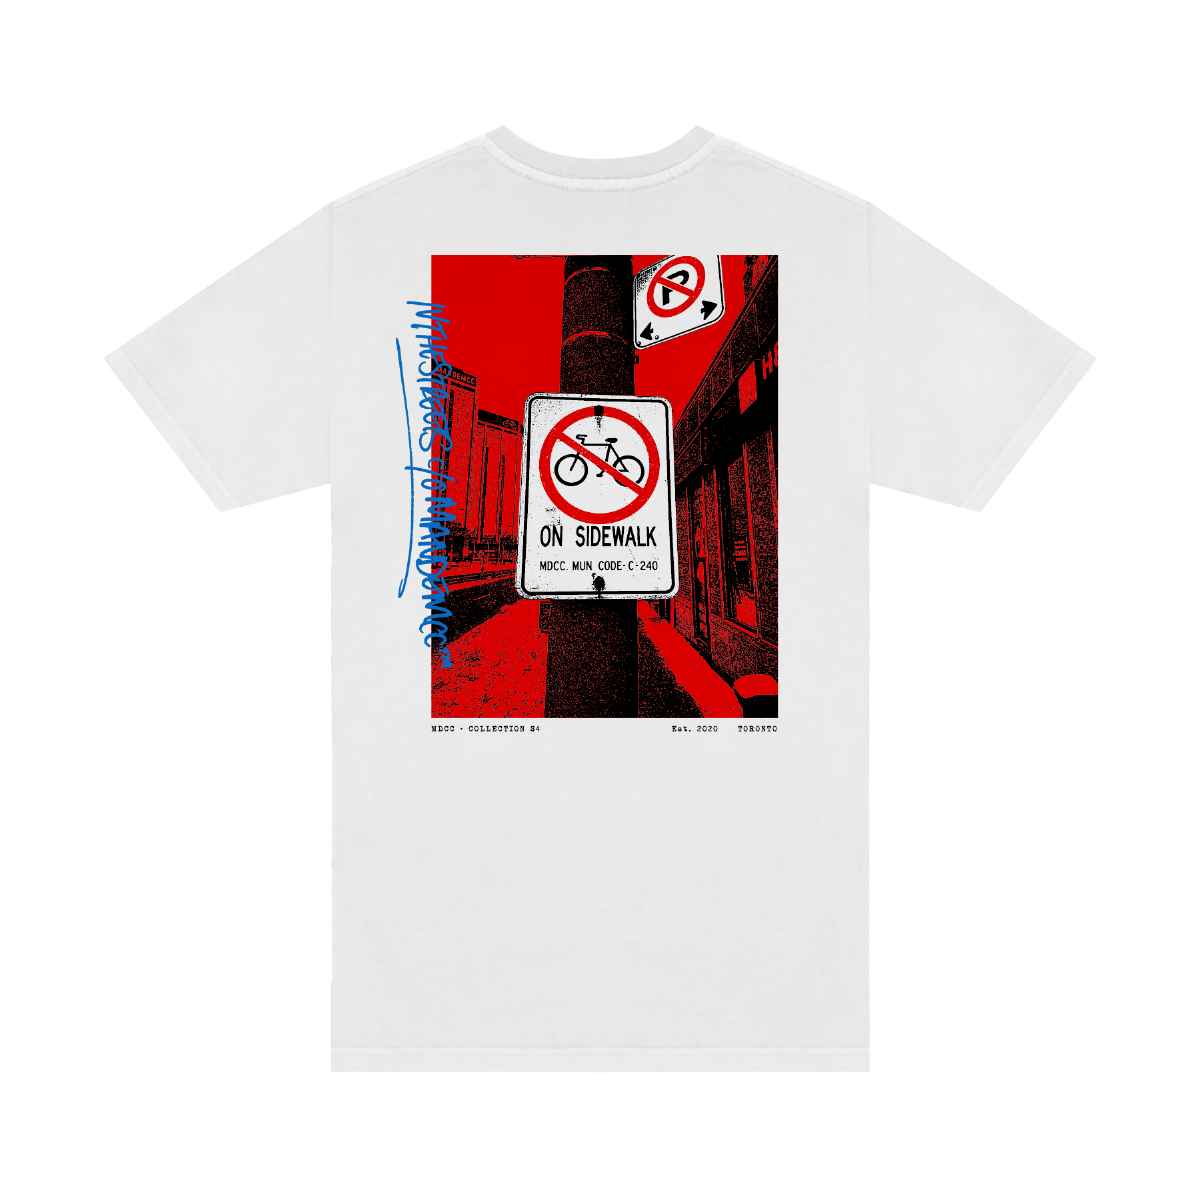 IV THE STREETS T-SHIRT